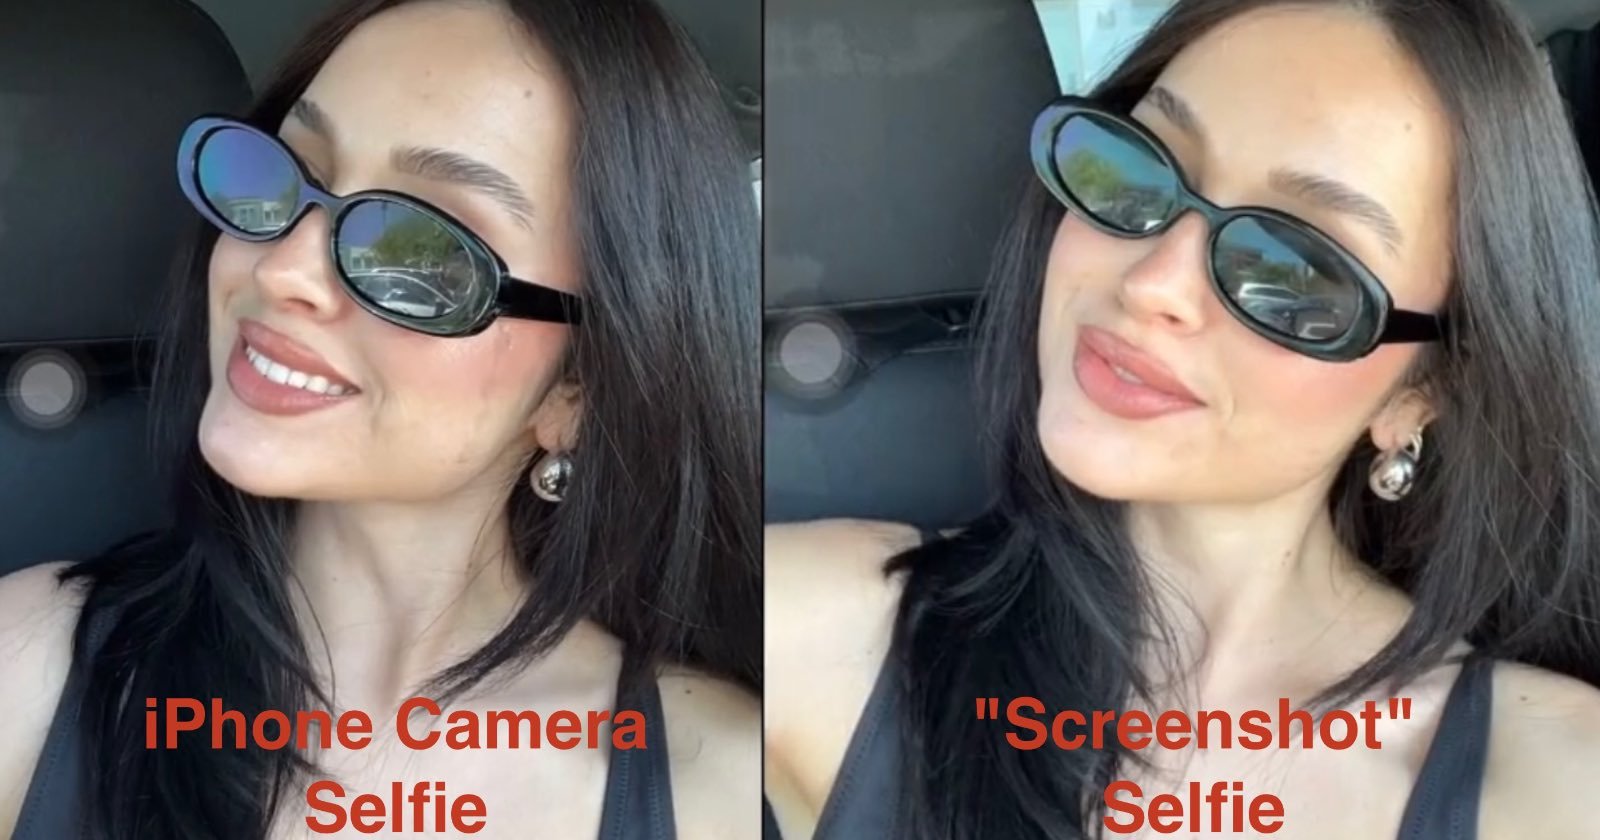 An influencer has claimed “screenshotting” is the secret to taking the best selfies and beats any photo shot with an iPhone camera lens &#